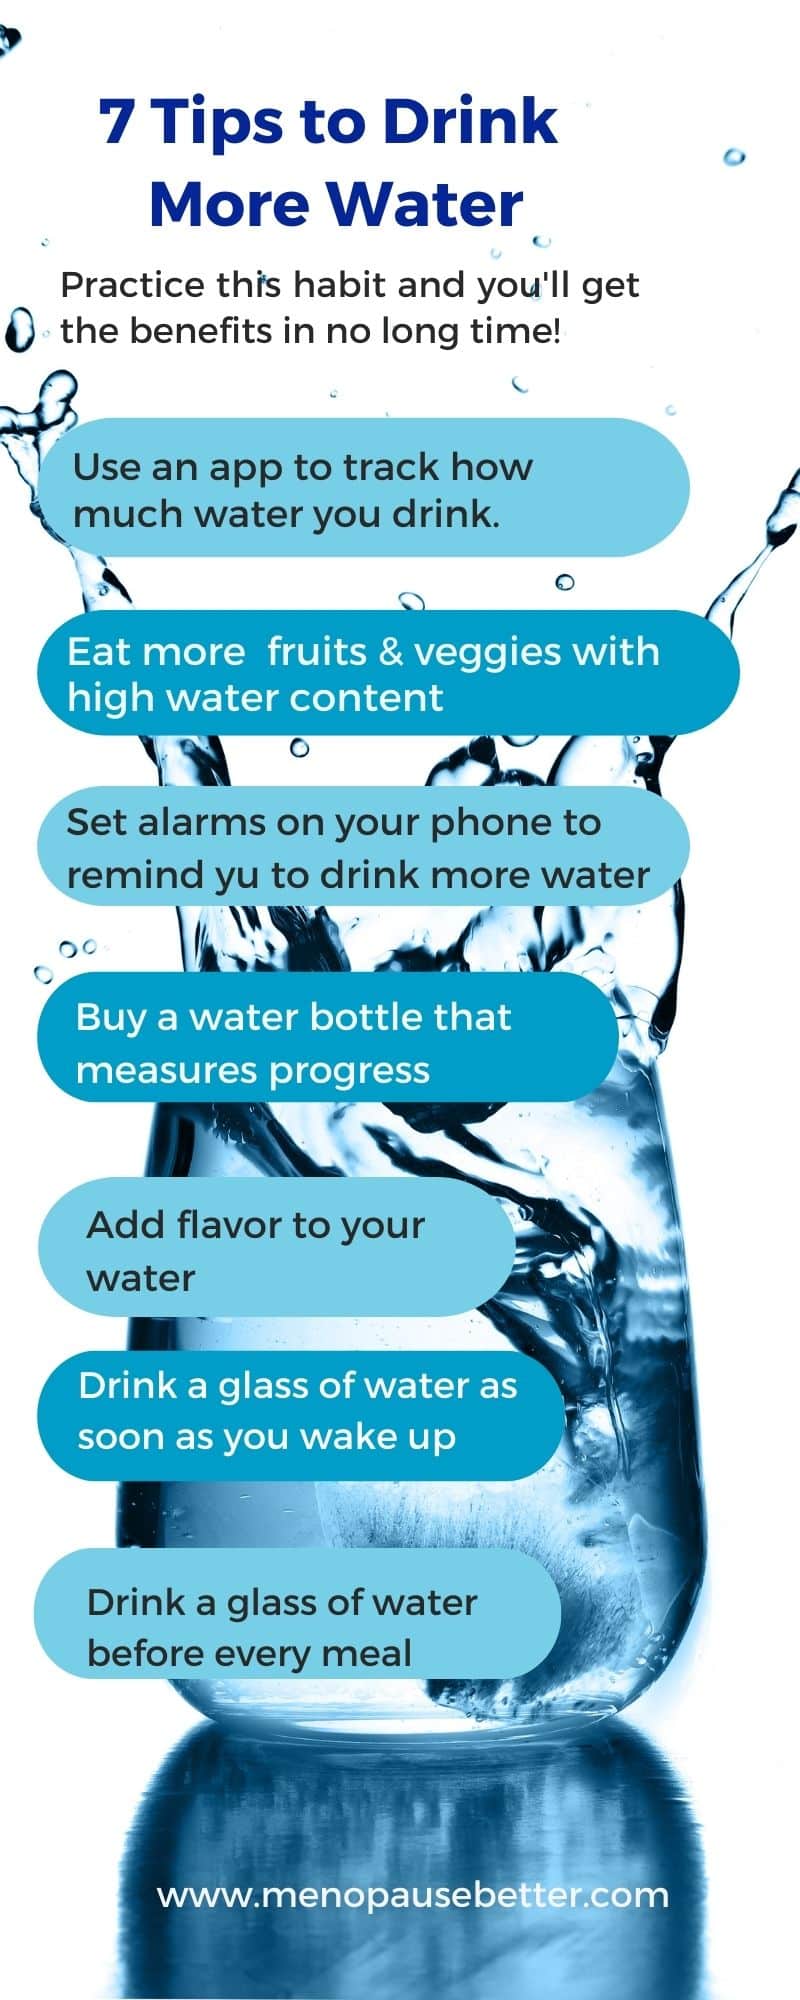 7 tips to drink more water